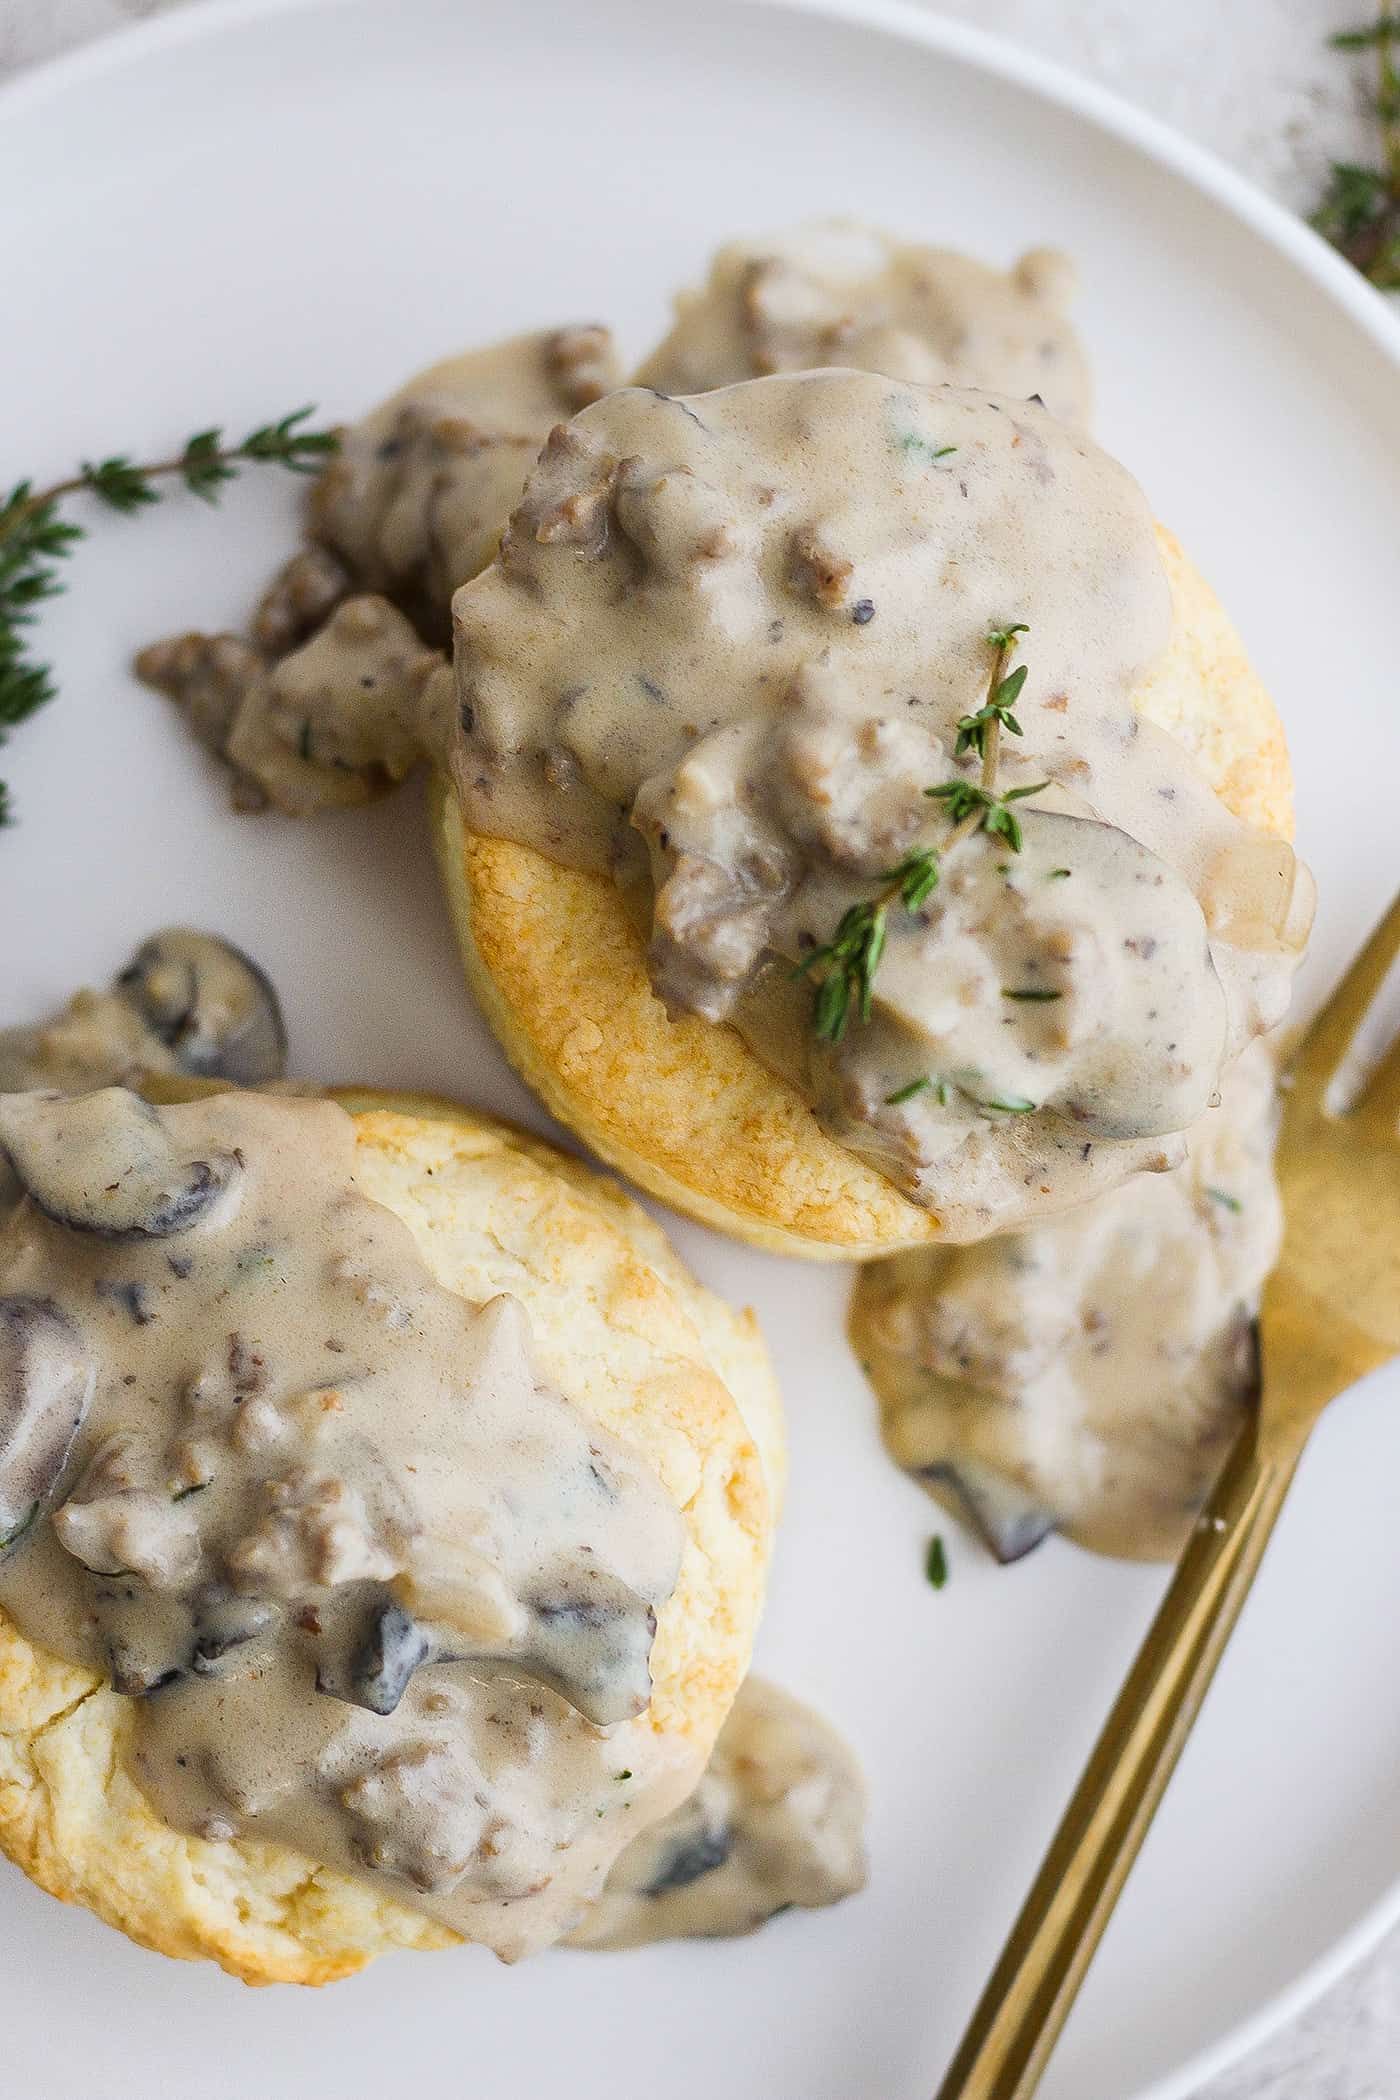 A fork rests on a plate of two cream biscuits topped with sausage gravy.